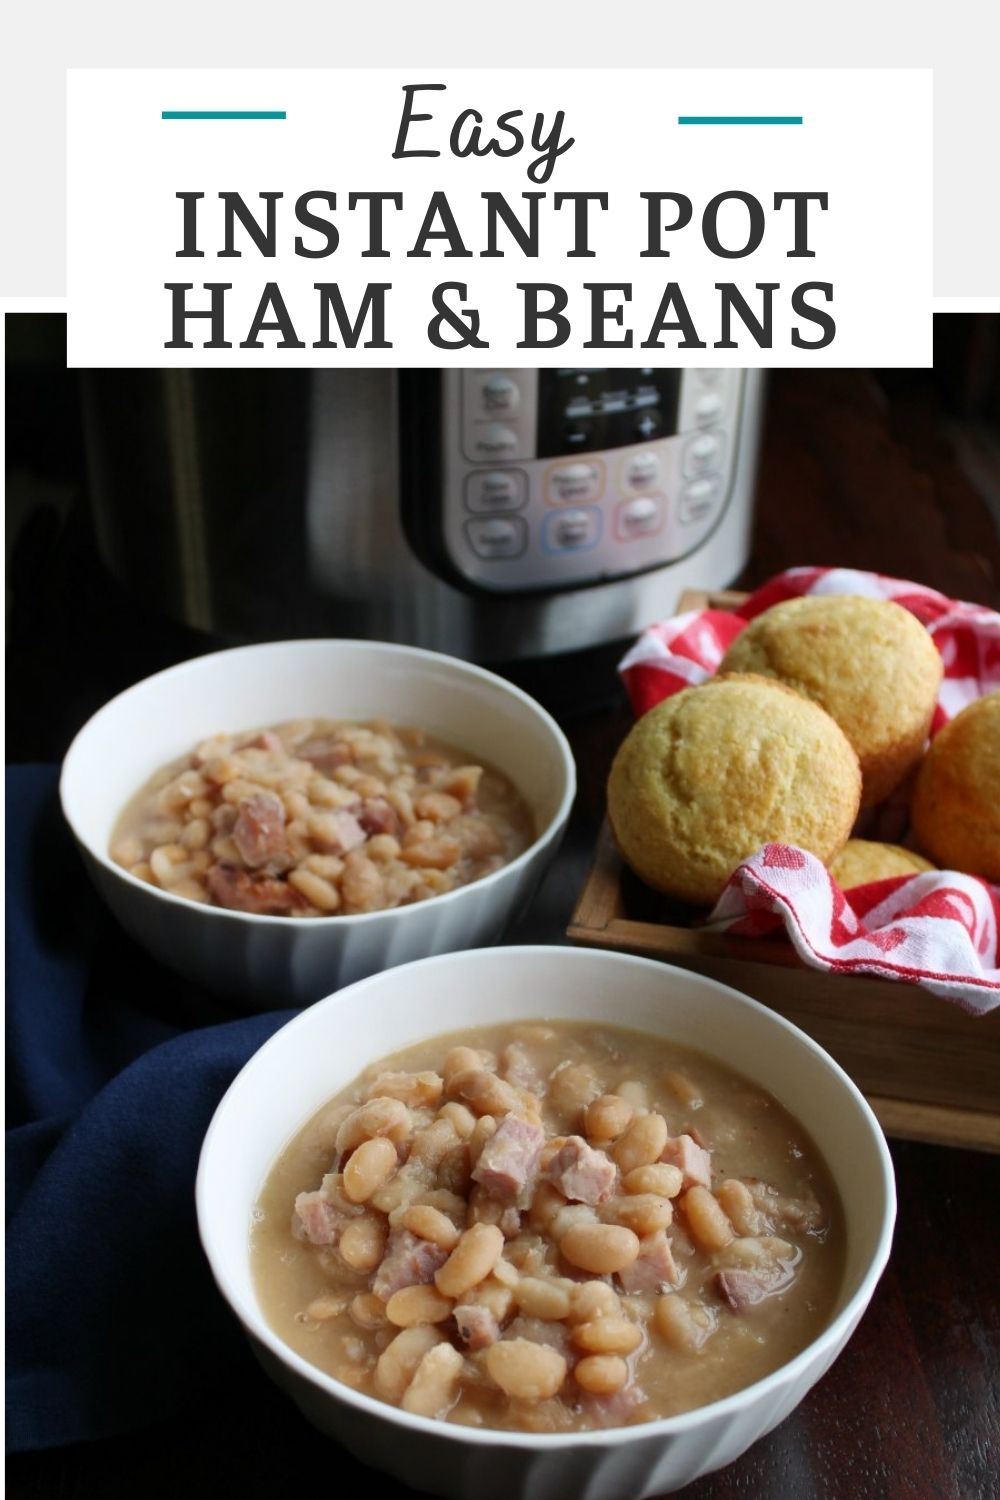 Make ham and beans in your instant pot for a satisfying meal. It’s a great way to use leftover ham and there’s no need to soak the beans!